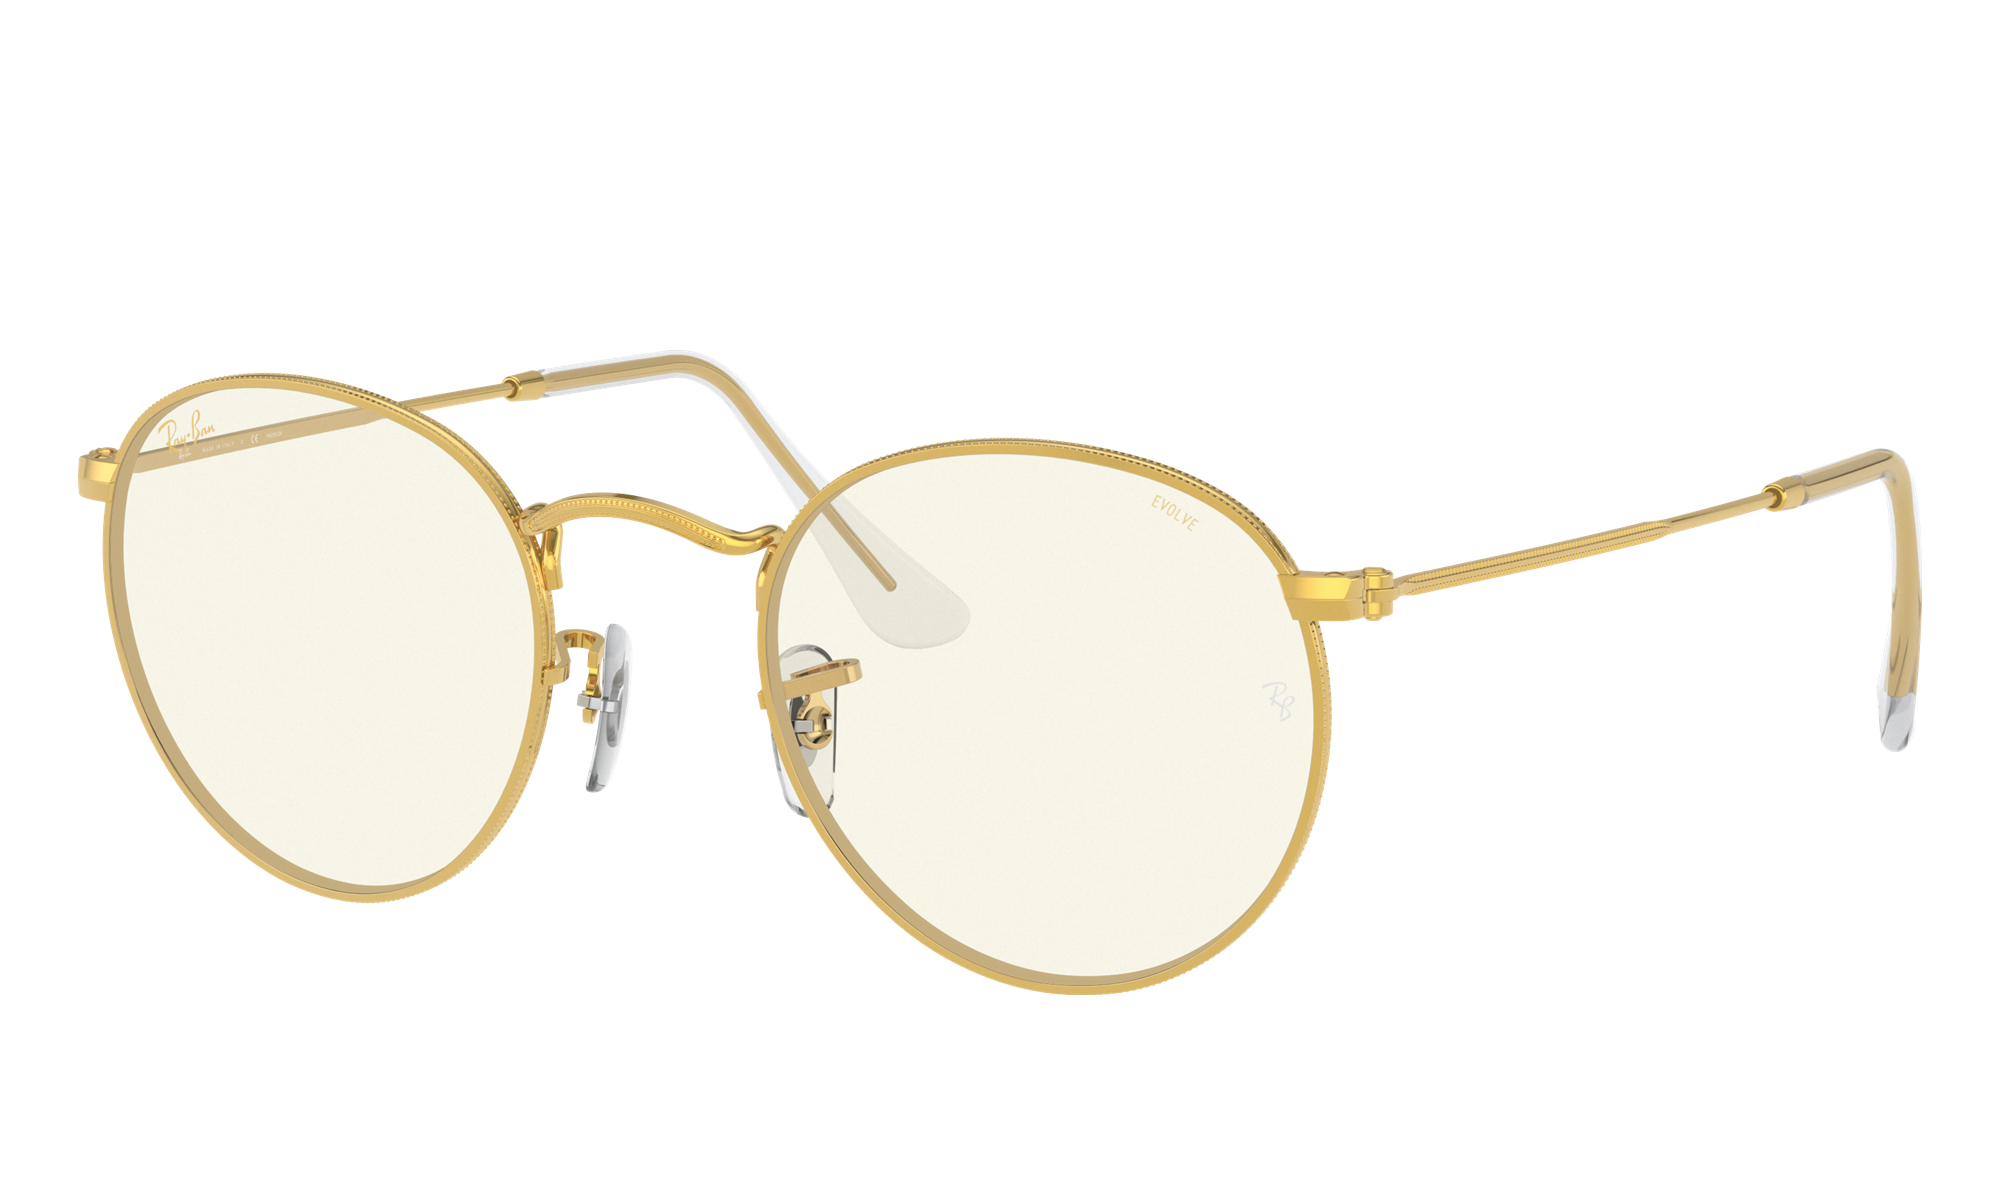 Ray-Ban Unisex Rb3447 Gold Size: Small